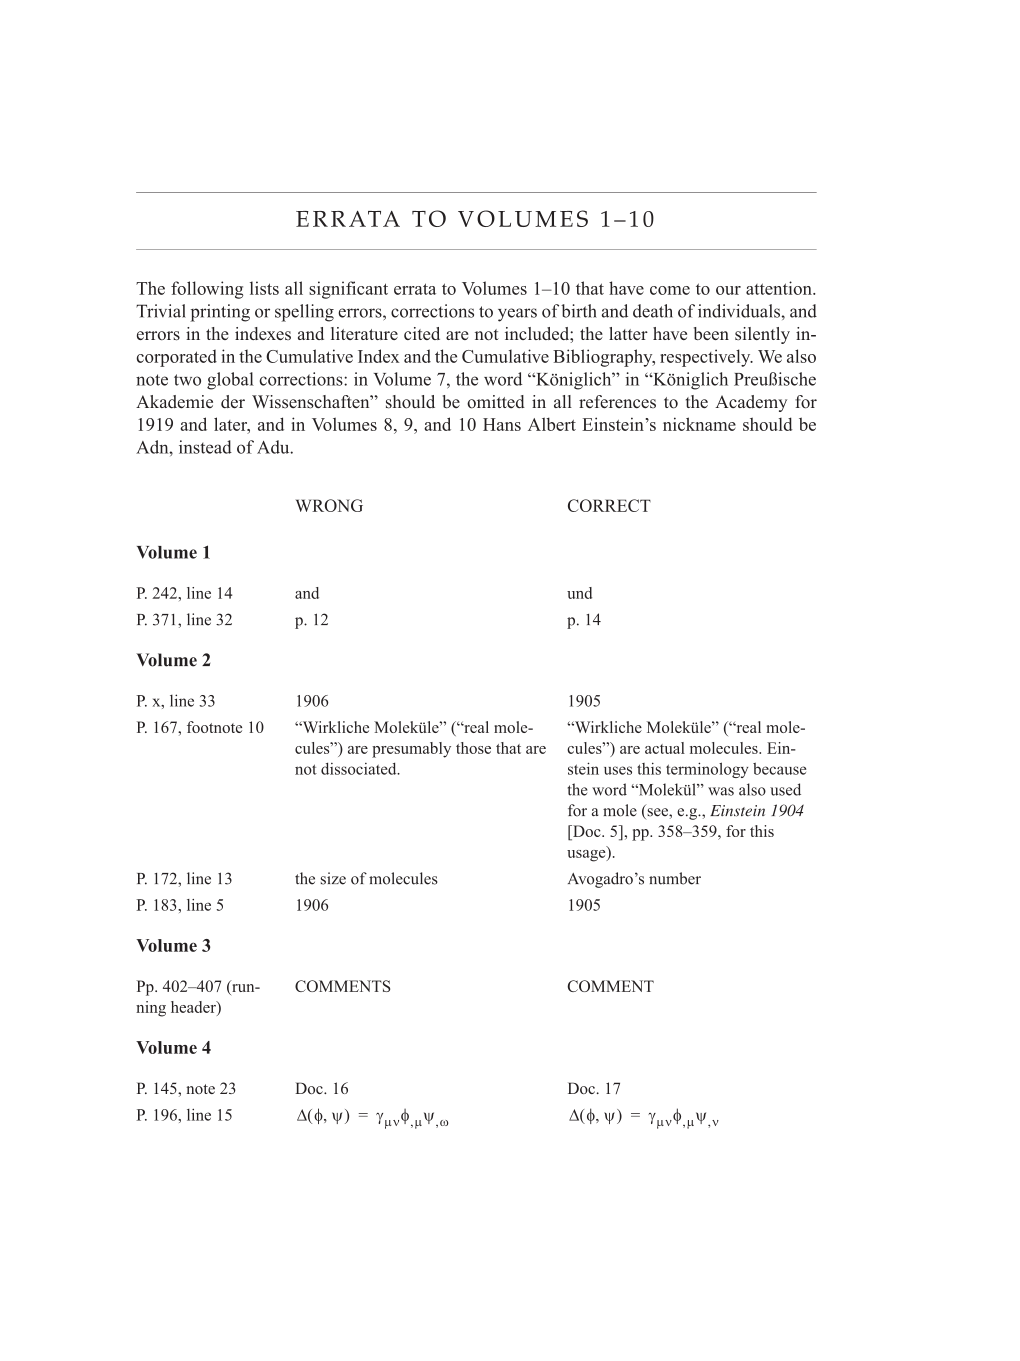 Volume 11: Cumulative Index, Bibliography, List of Correspondence, Chronology, and Errata to Volumes 1-10 page 613